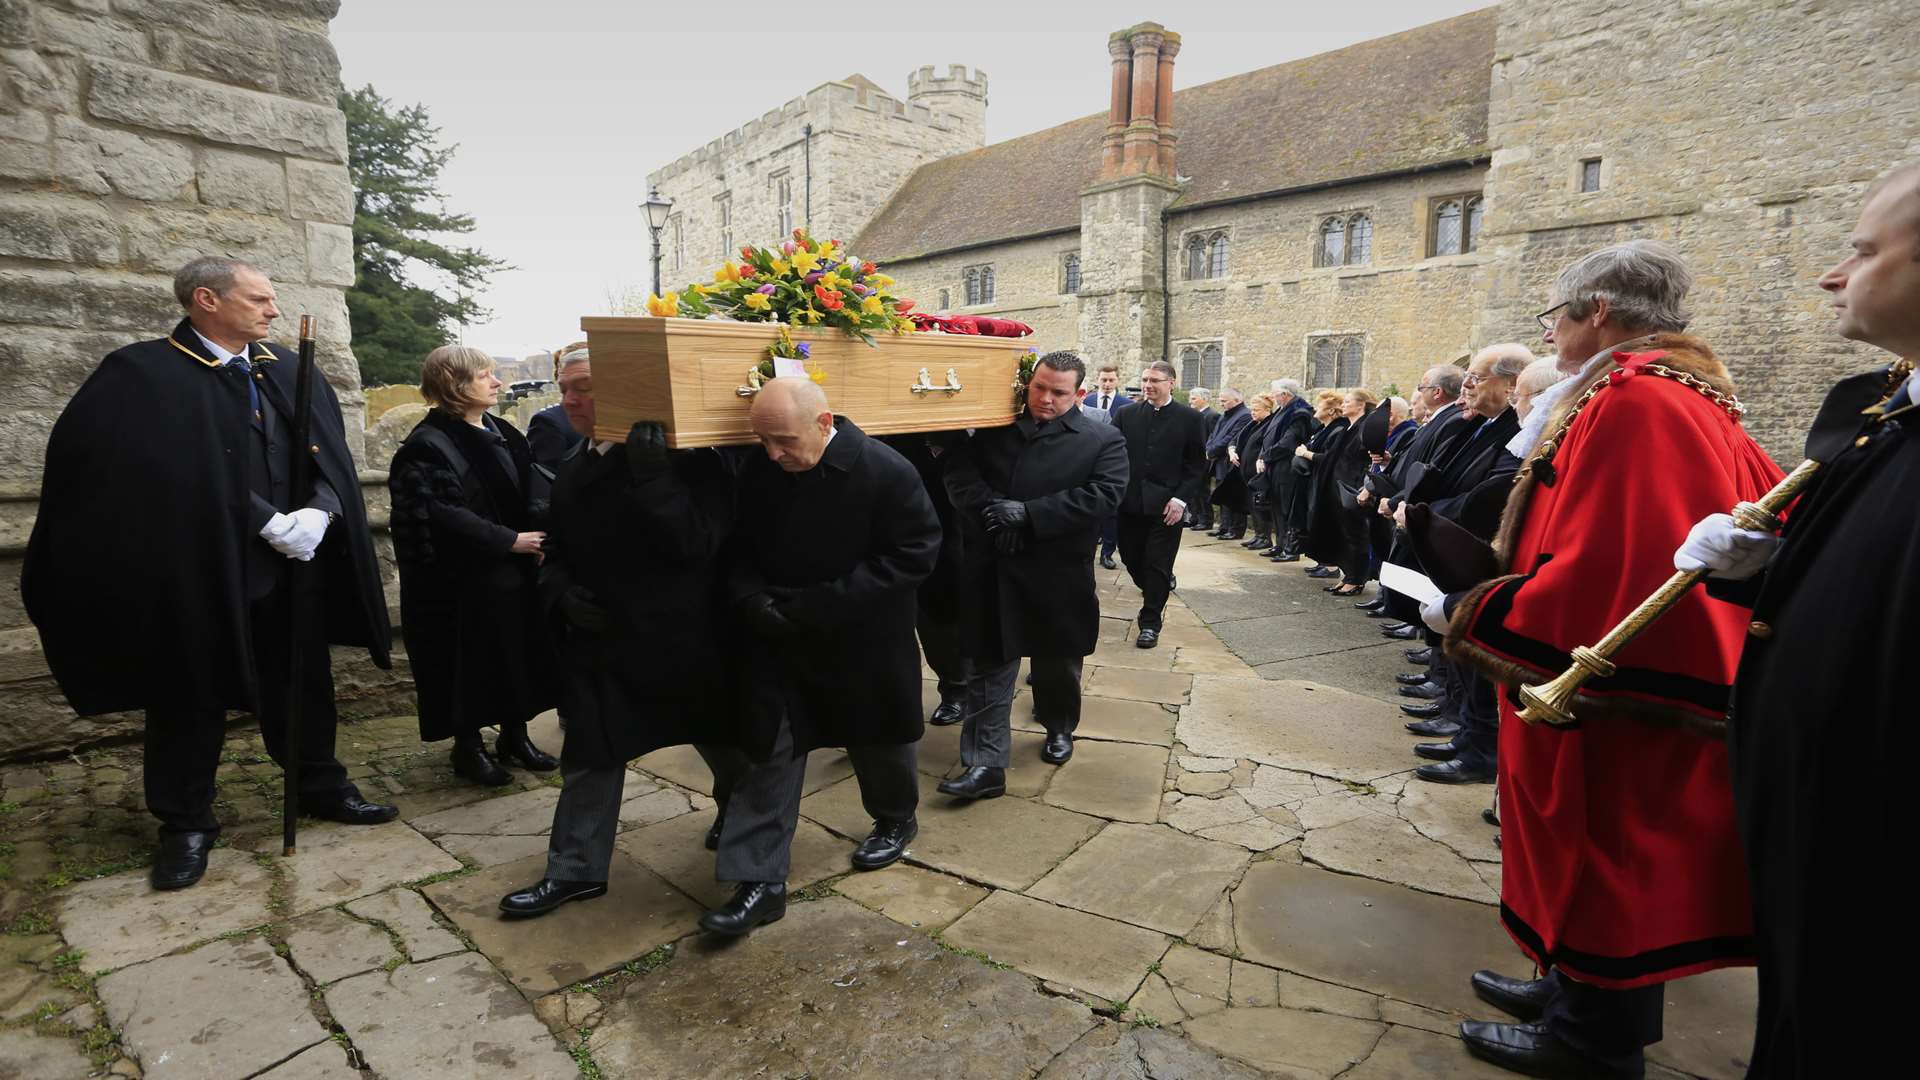 Mourners line the path of All Saints Church, Maidstone, for the funeral of Peter Parvin.